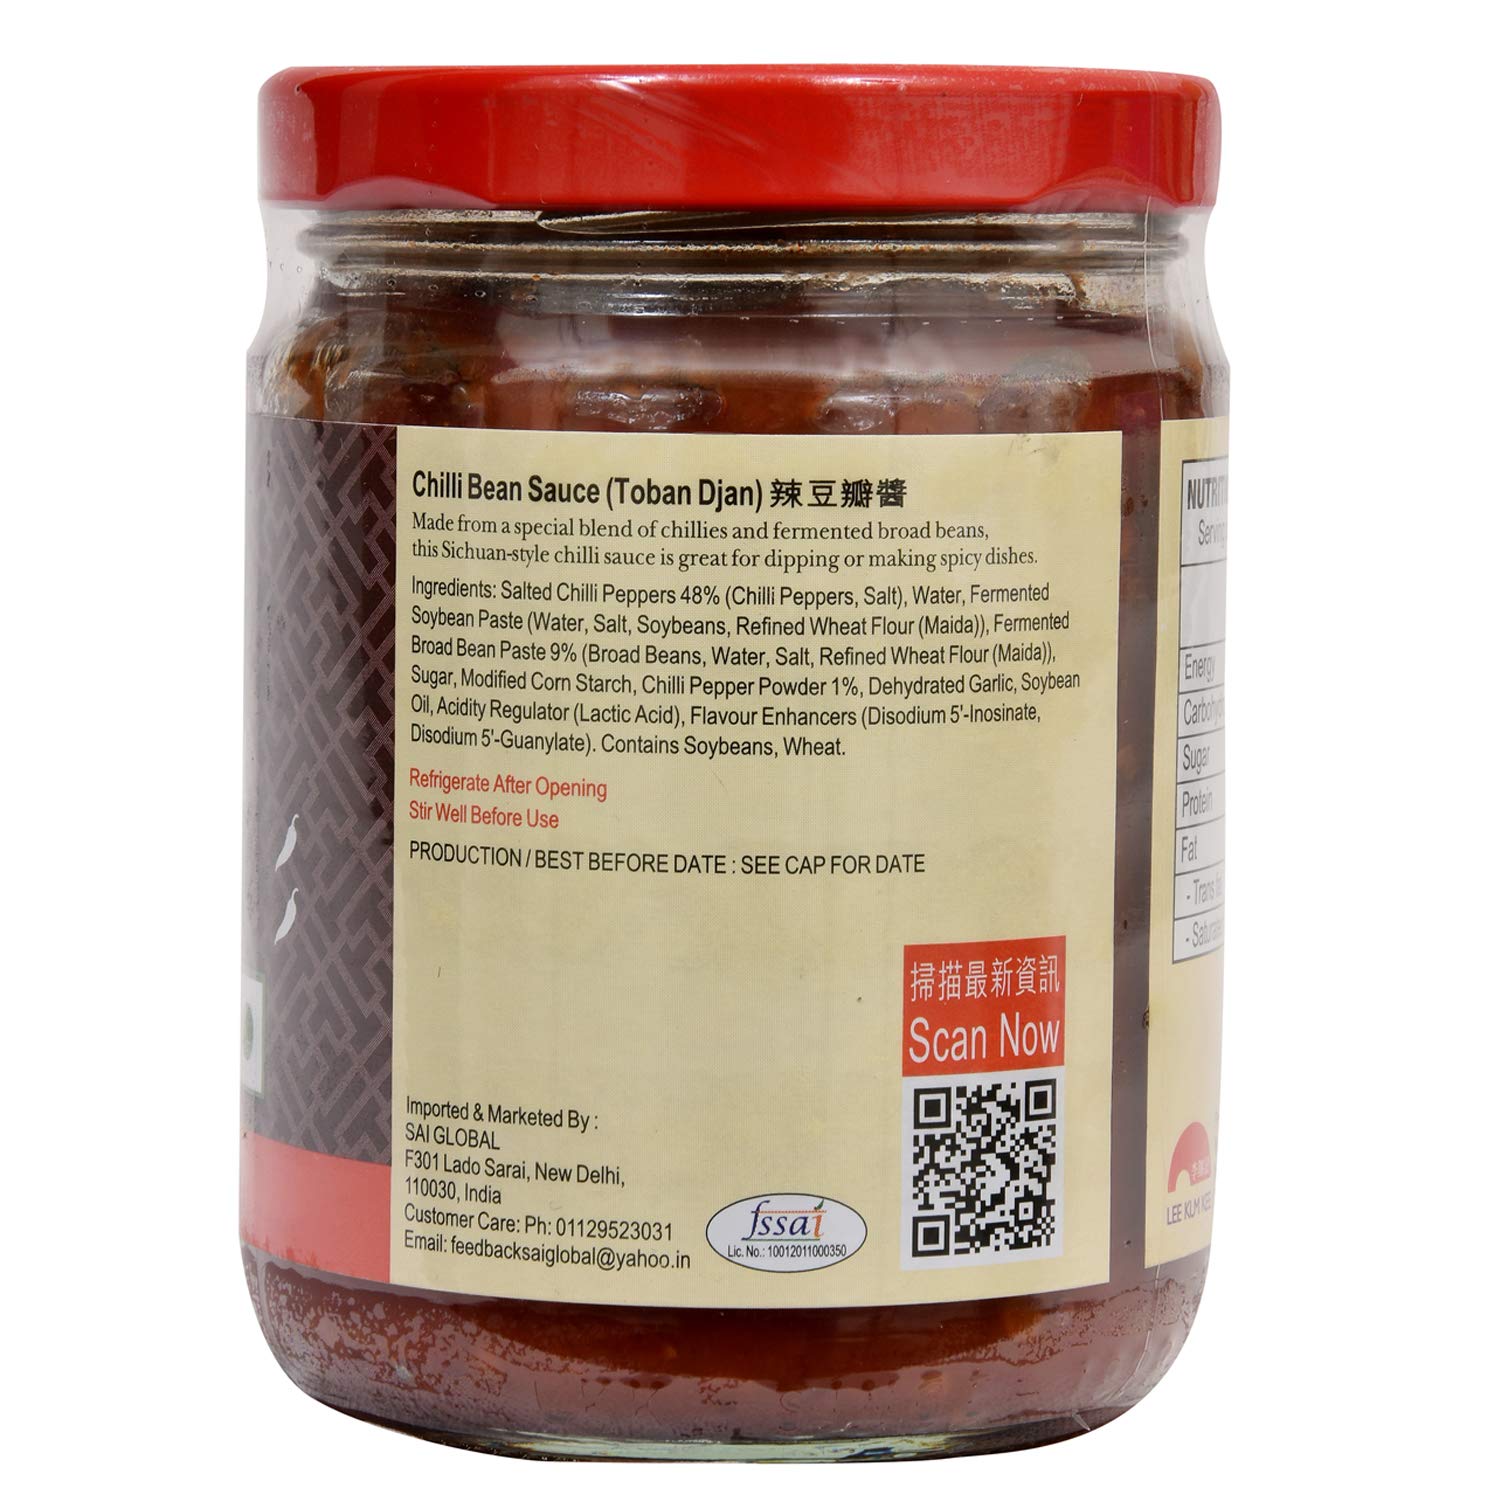 Lee Kum Kee Chilli Bean Sauce, 226g (Imported)